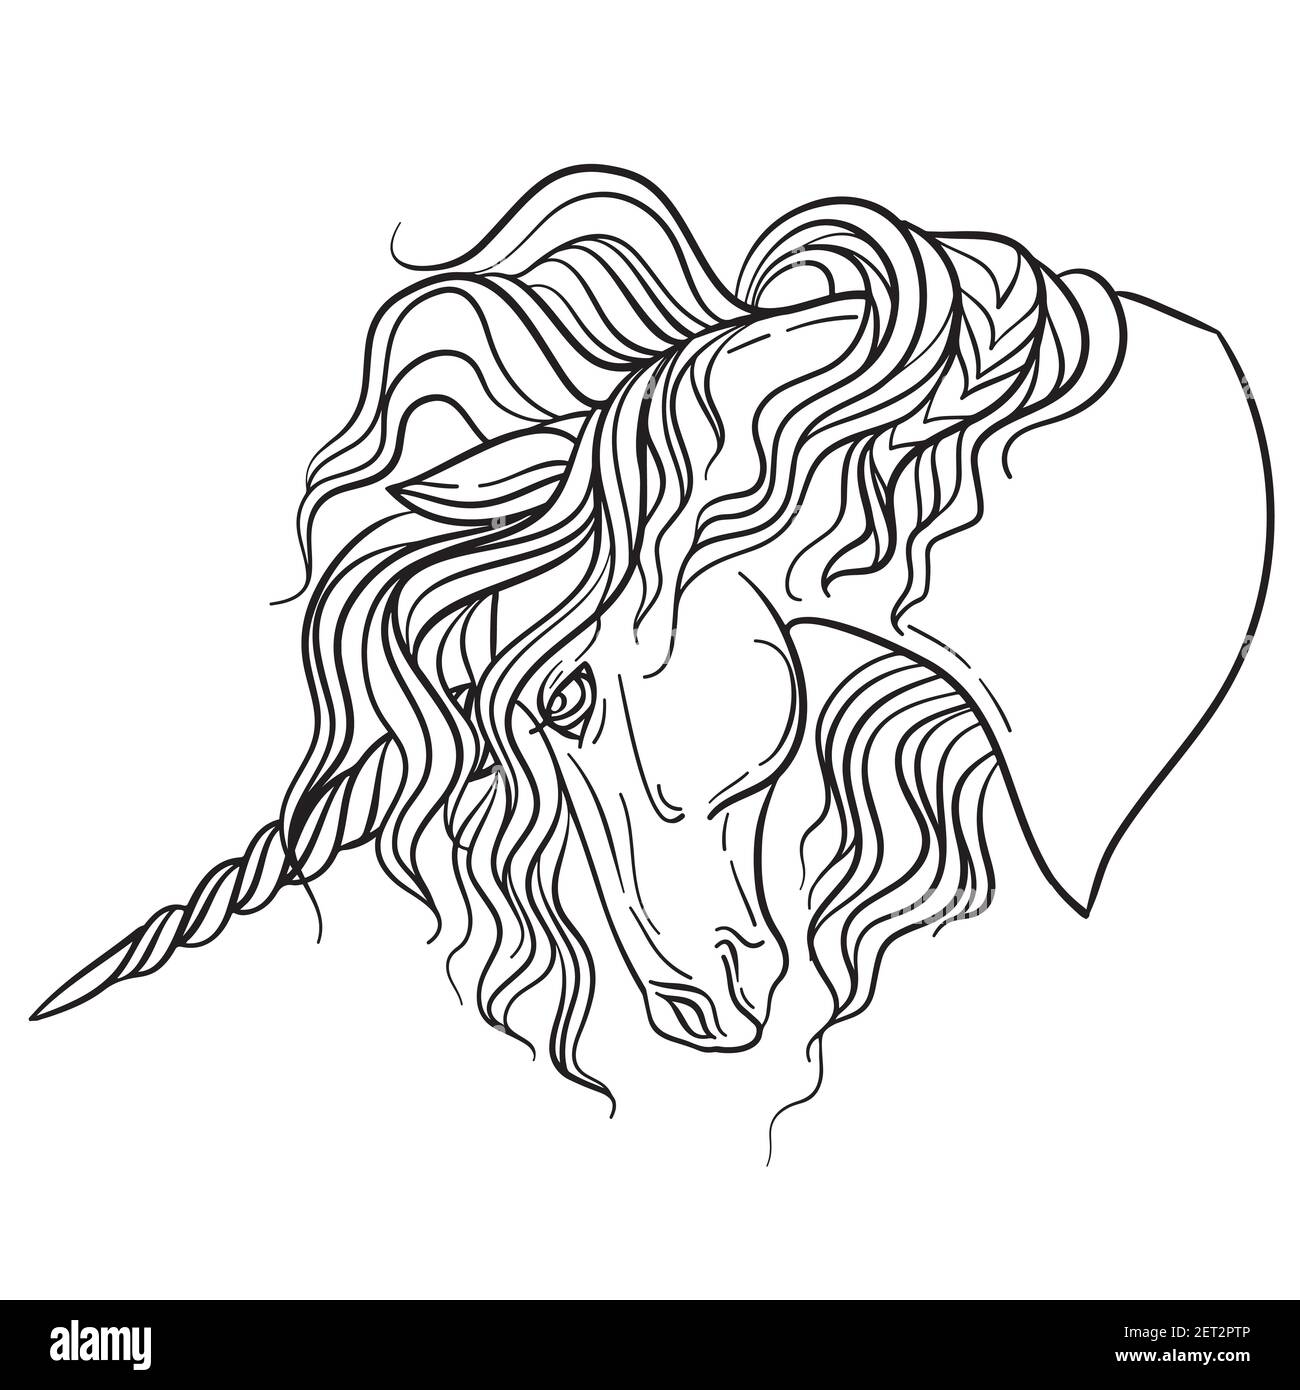 Beautiful profile of the unicorn with a long mane. Vector black and white isolated contour illustration for coloring book pages, design, prints, poste Stock Vector